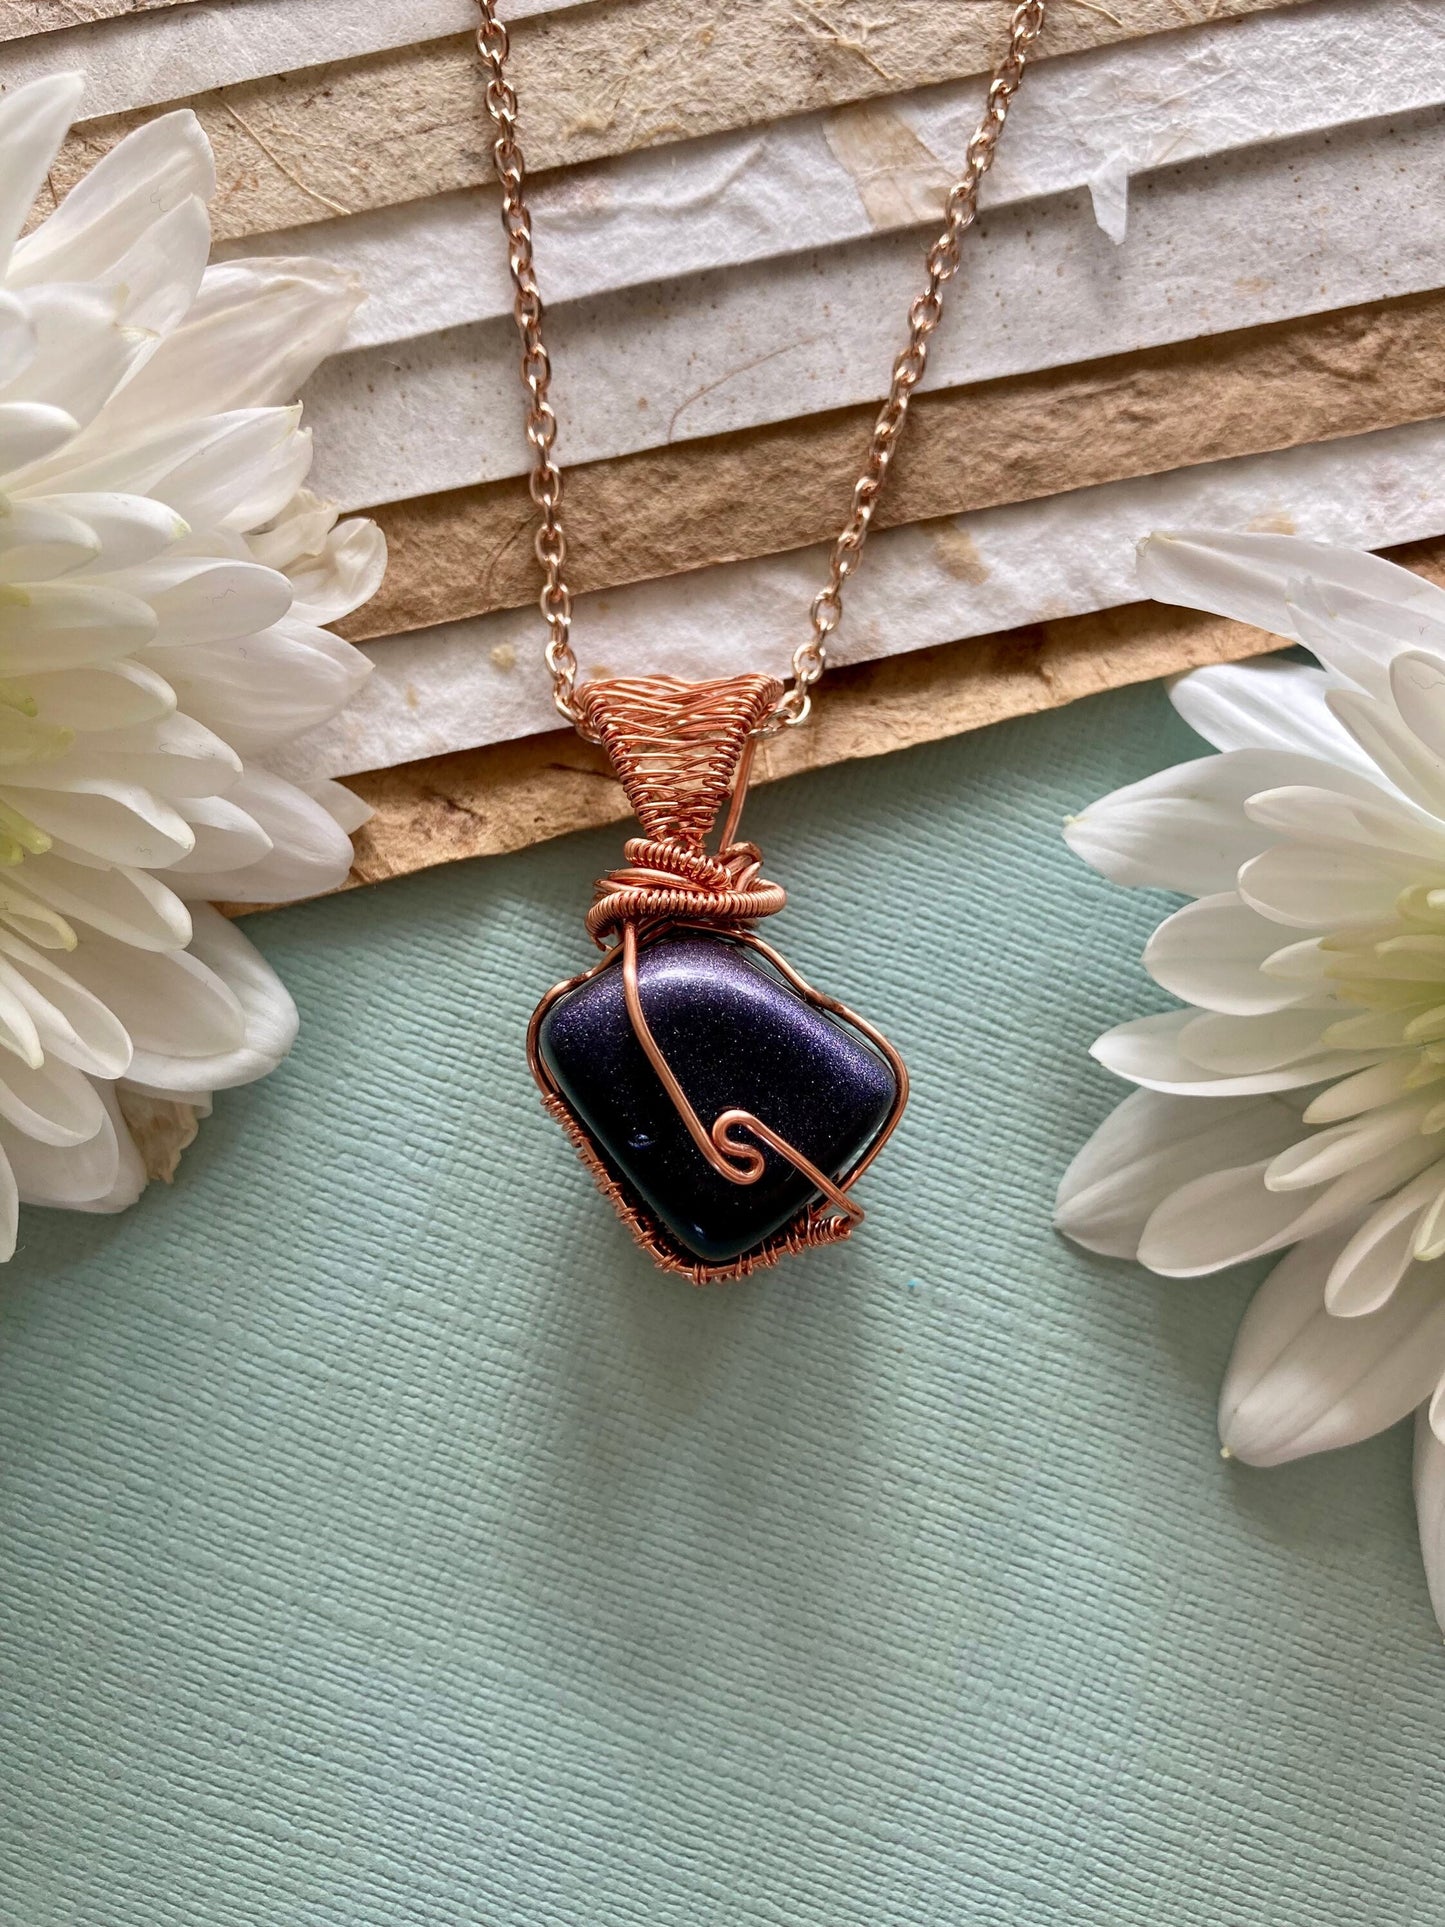 Blue goldstone pendant handmade necklace wire wrapped natural stone with 18 inch length chain